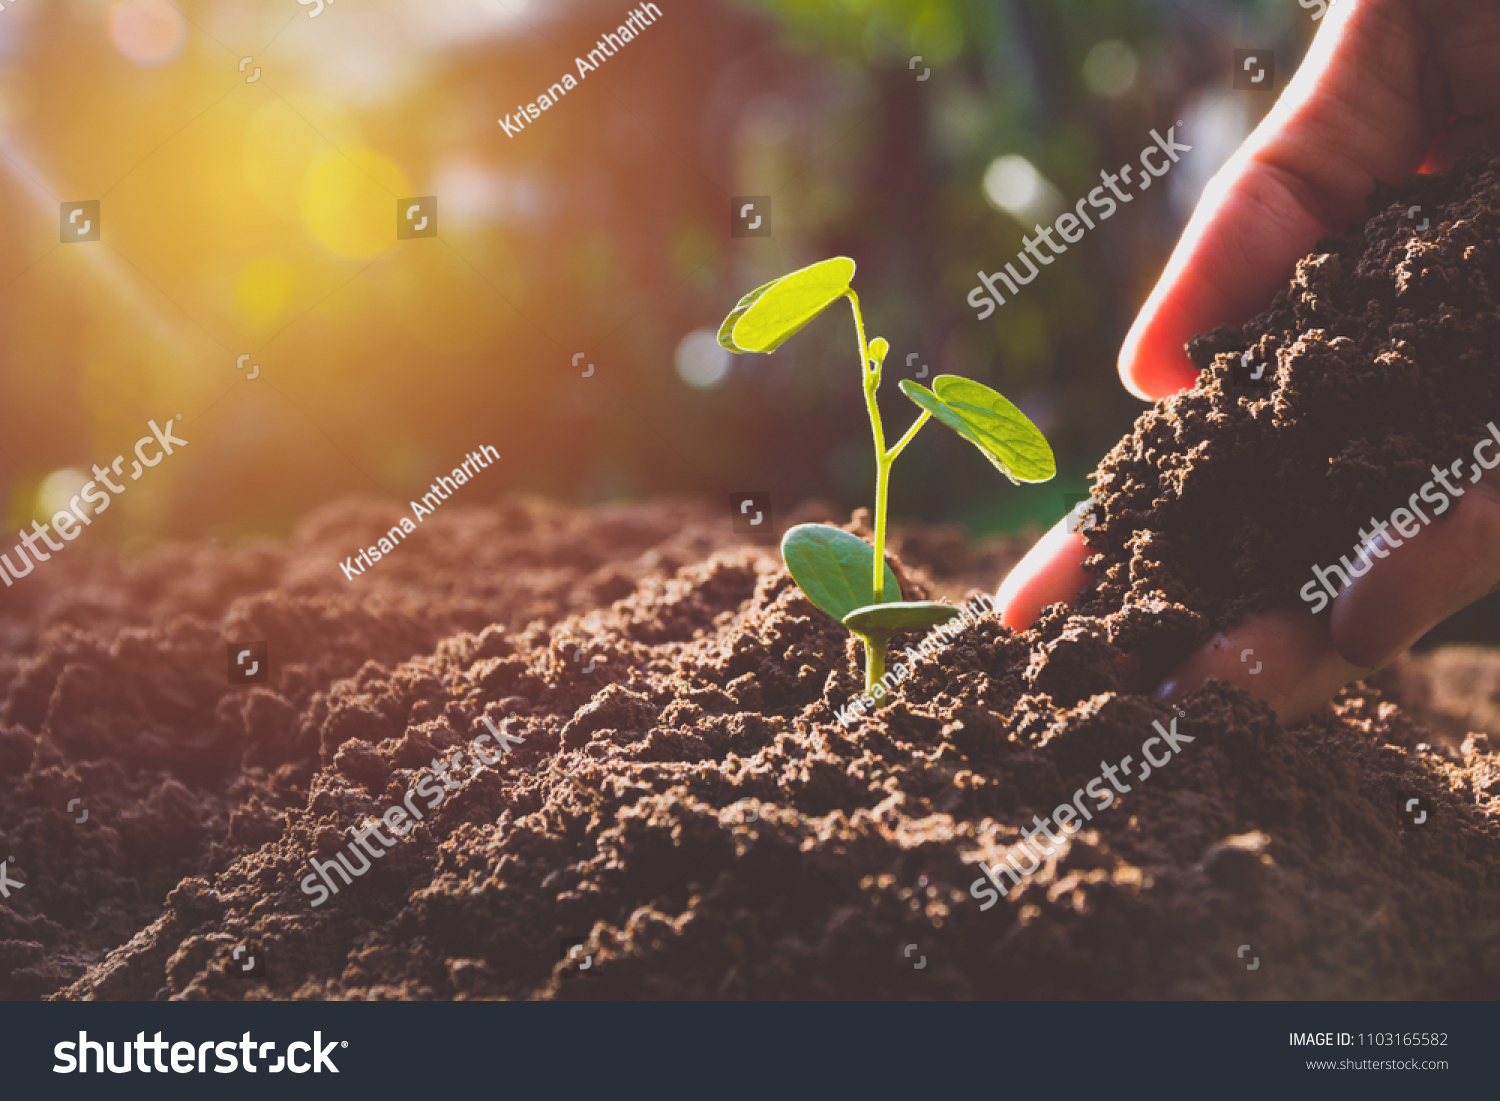 Hand with green young plant growing in soil on nature background #1103165582